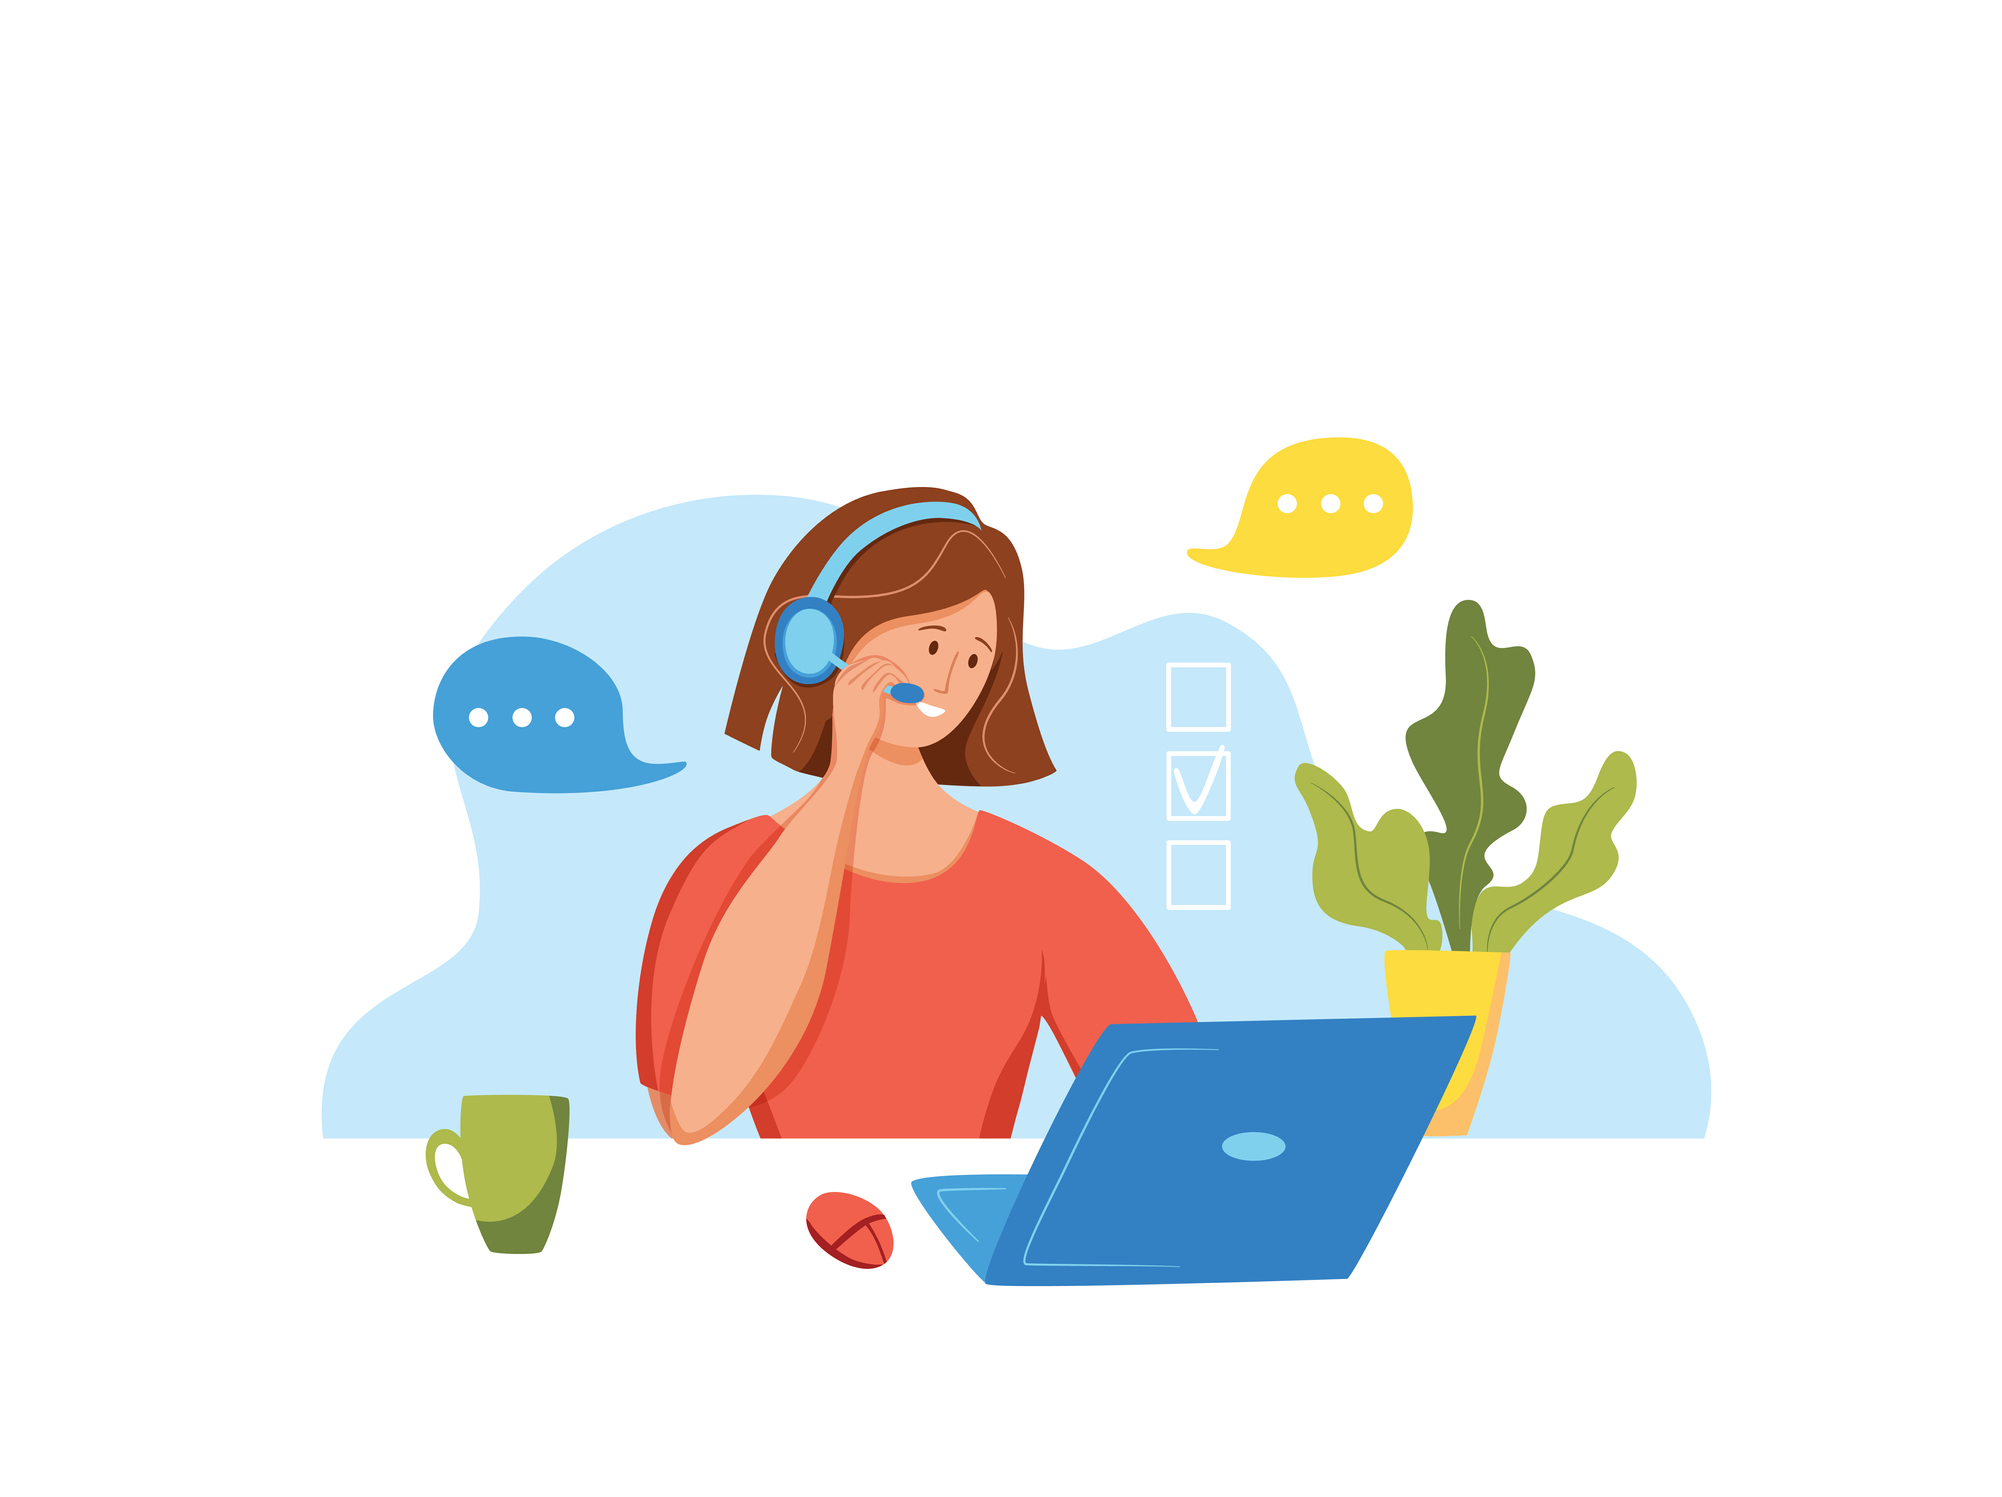 Call center operator vector illustration. Customer online support manager woman working in headphones with microphone in sales